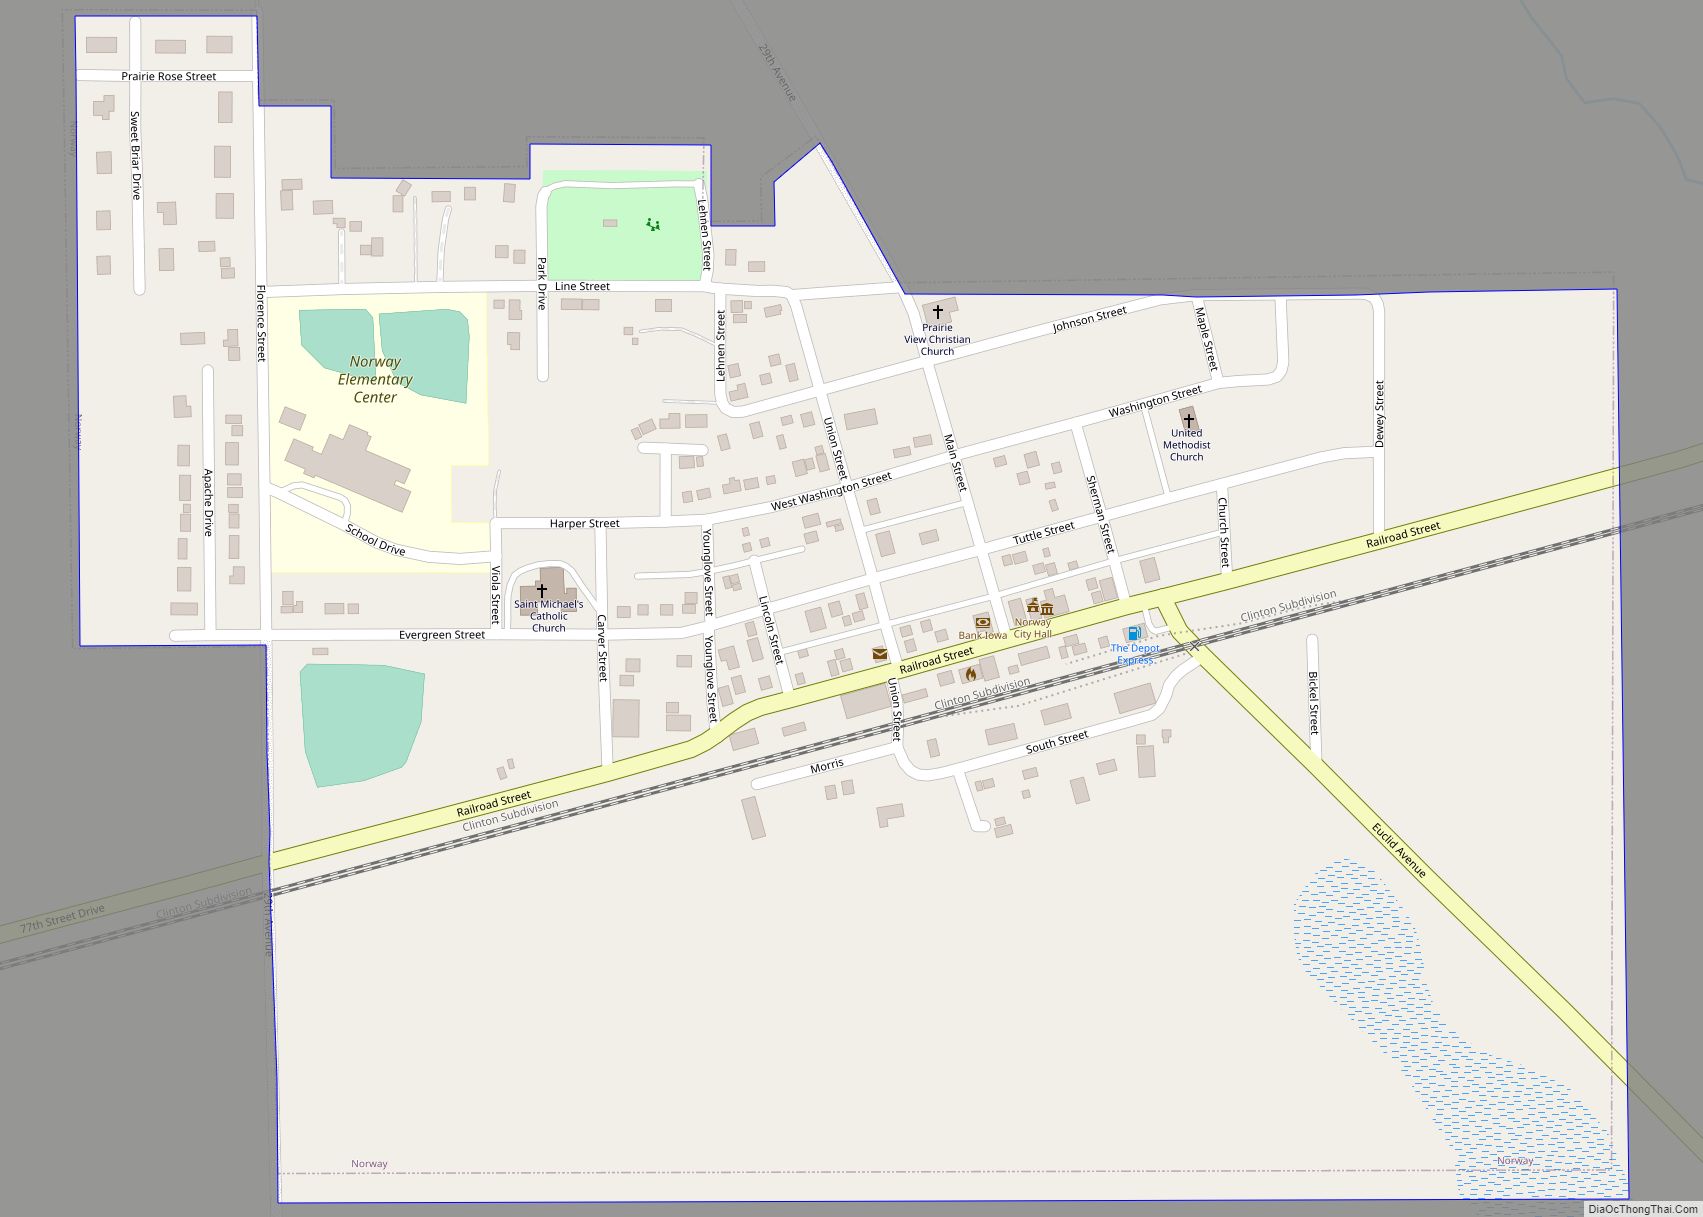 Map of Norway city